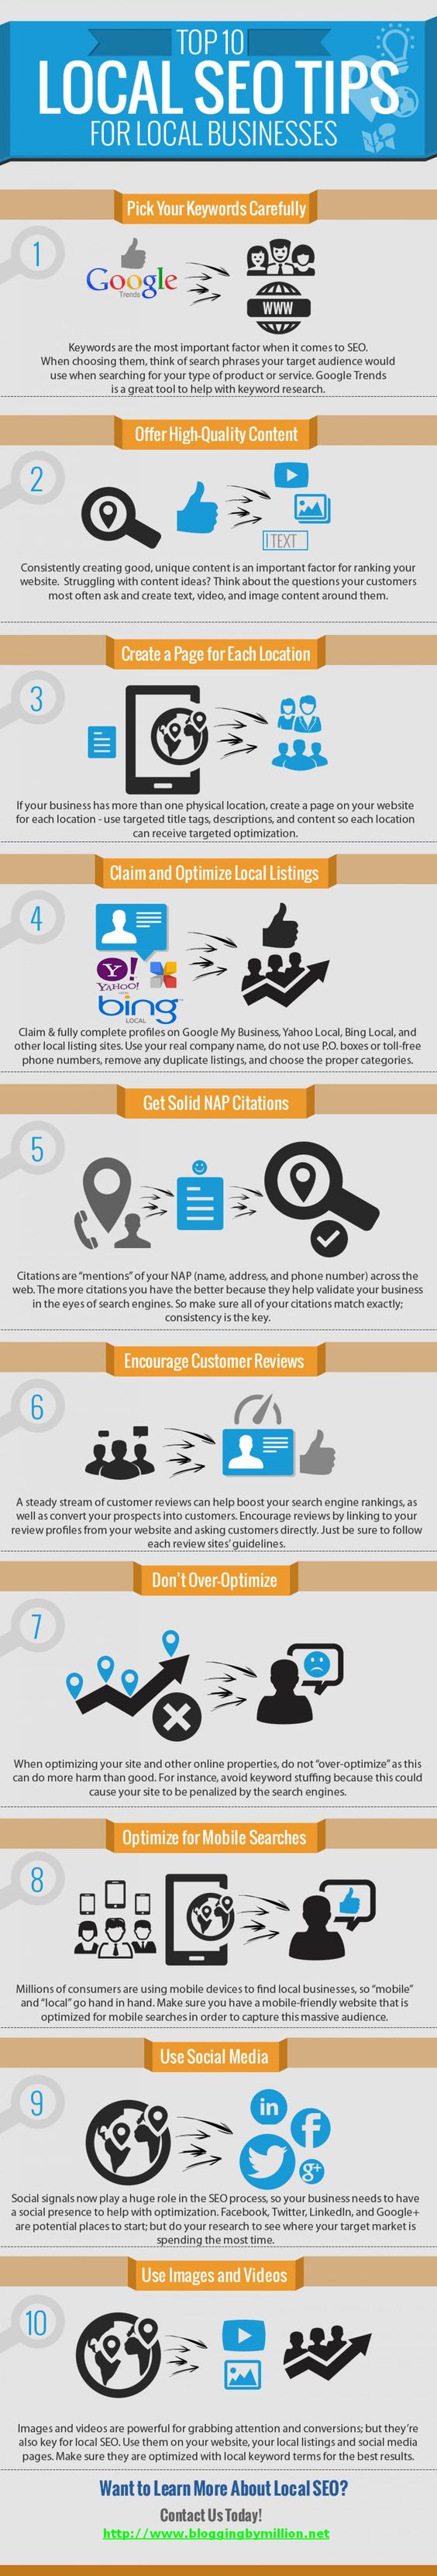 BEST LOCAL SEO TIPS